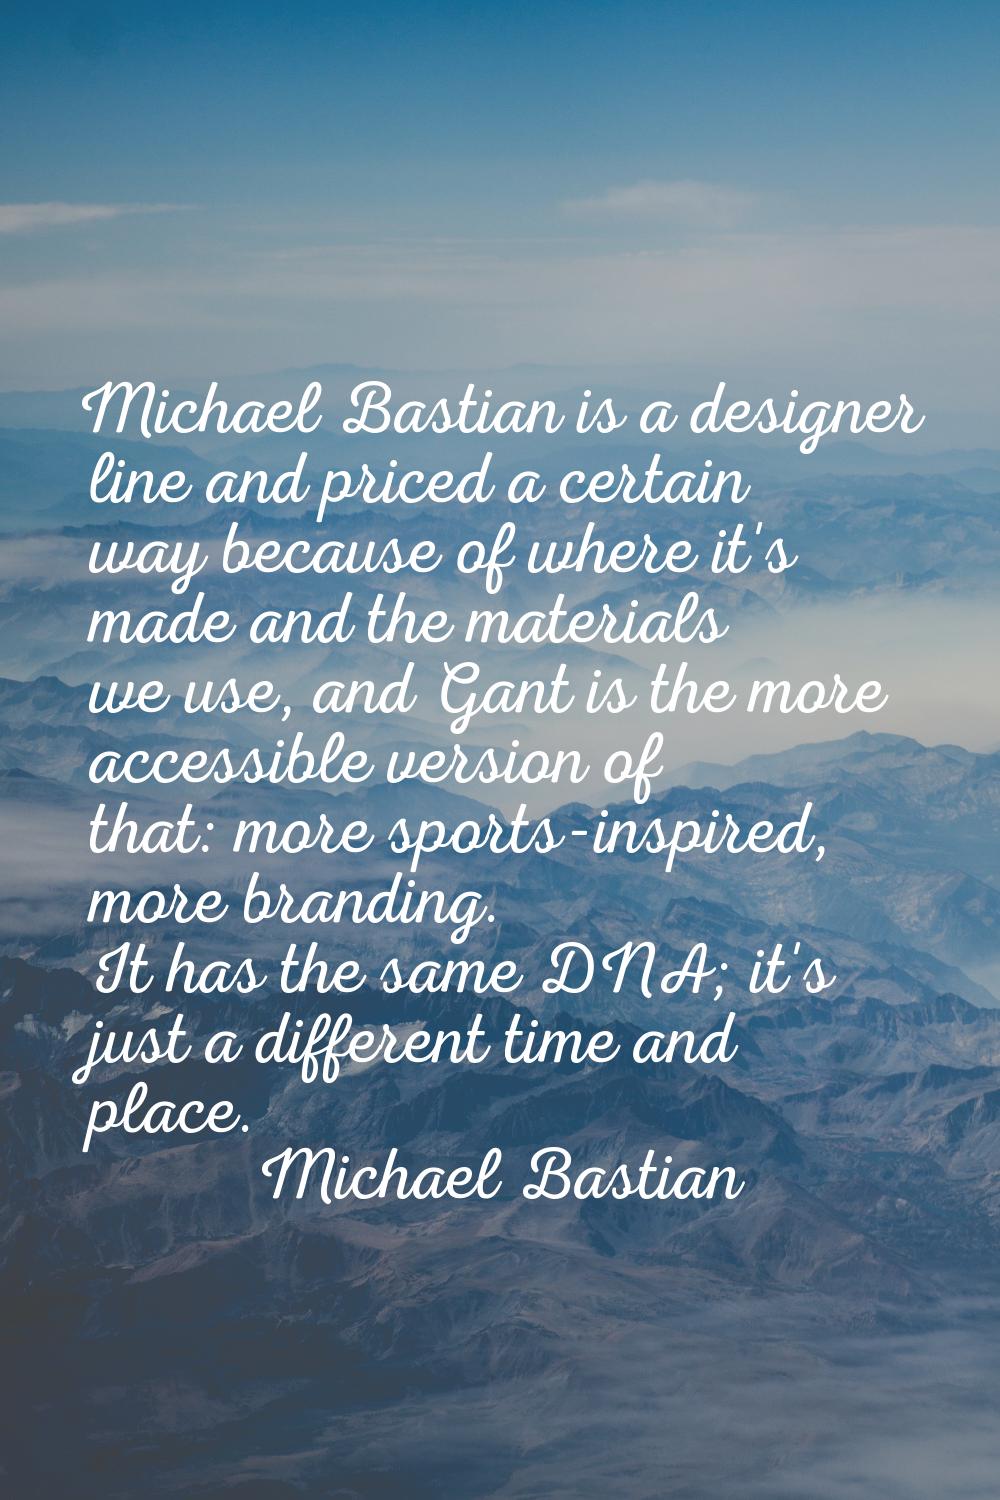 Michael Bastian is a designer line and priced a certain way because of where it's made and the mate